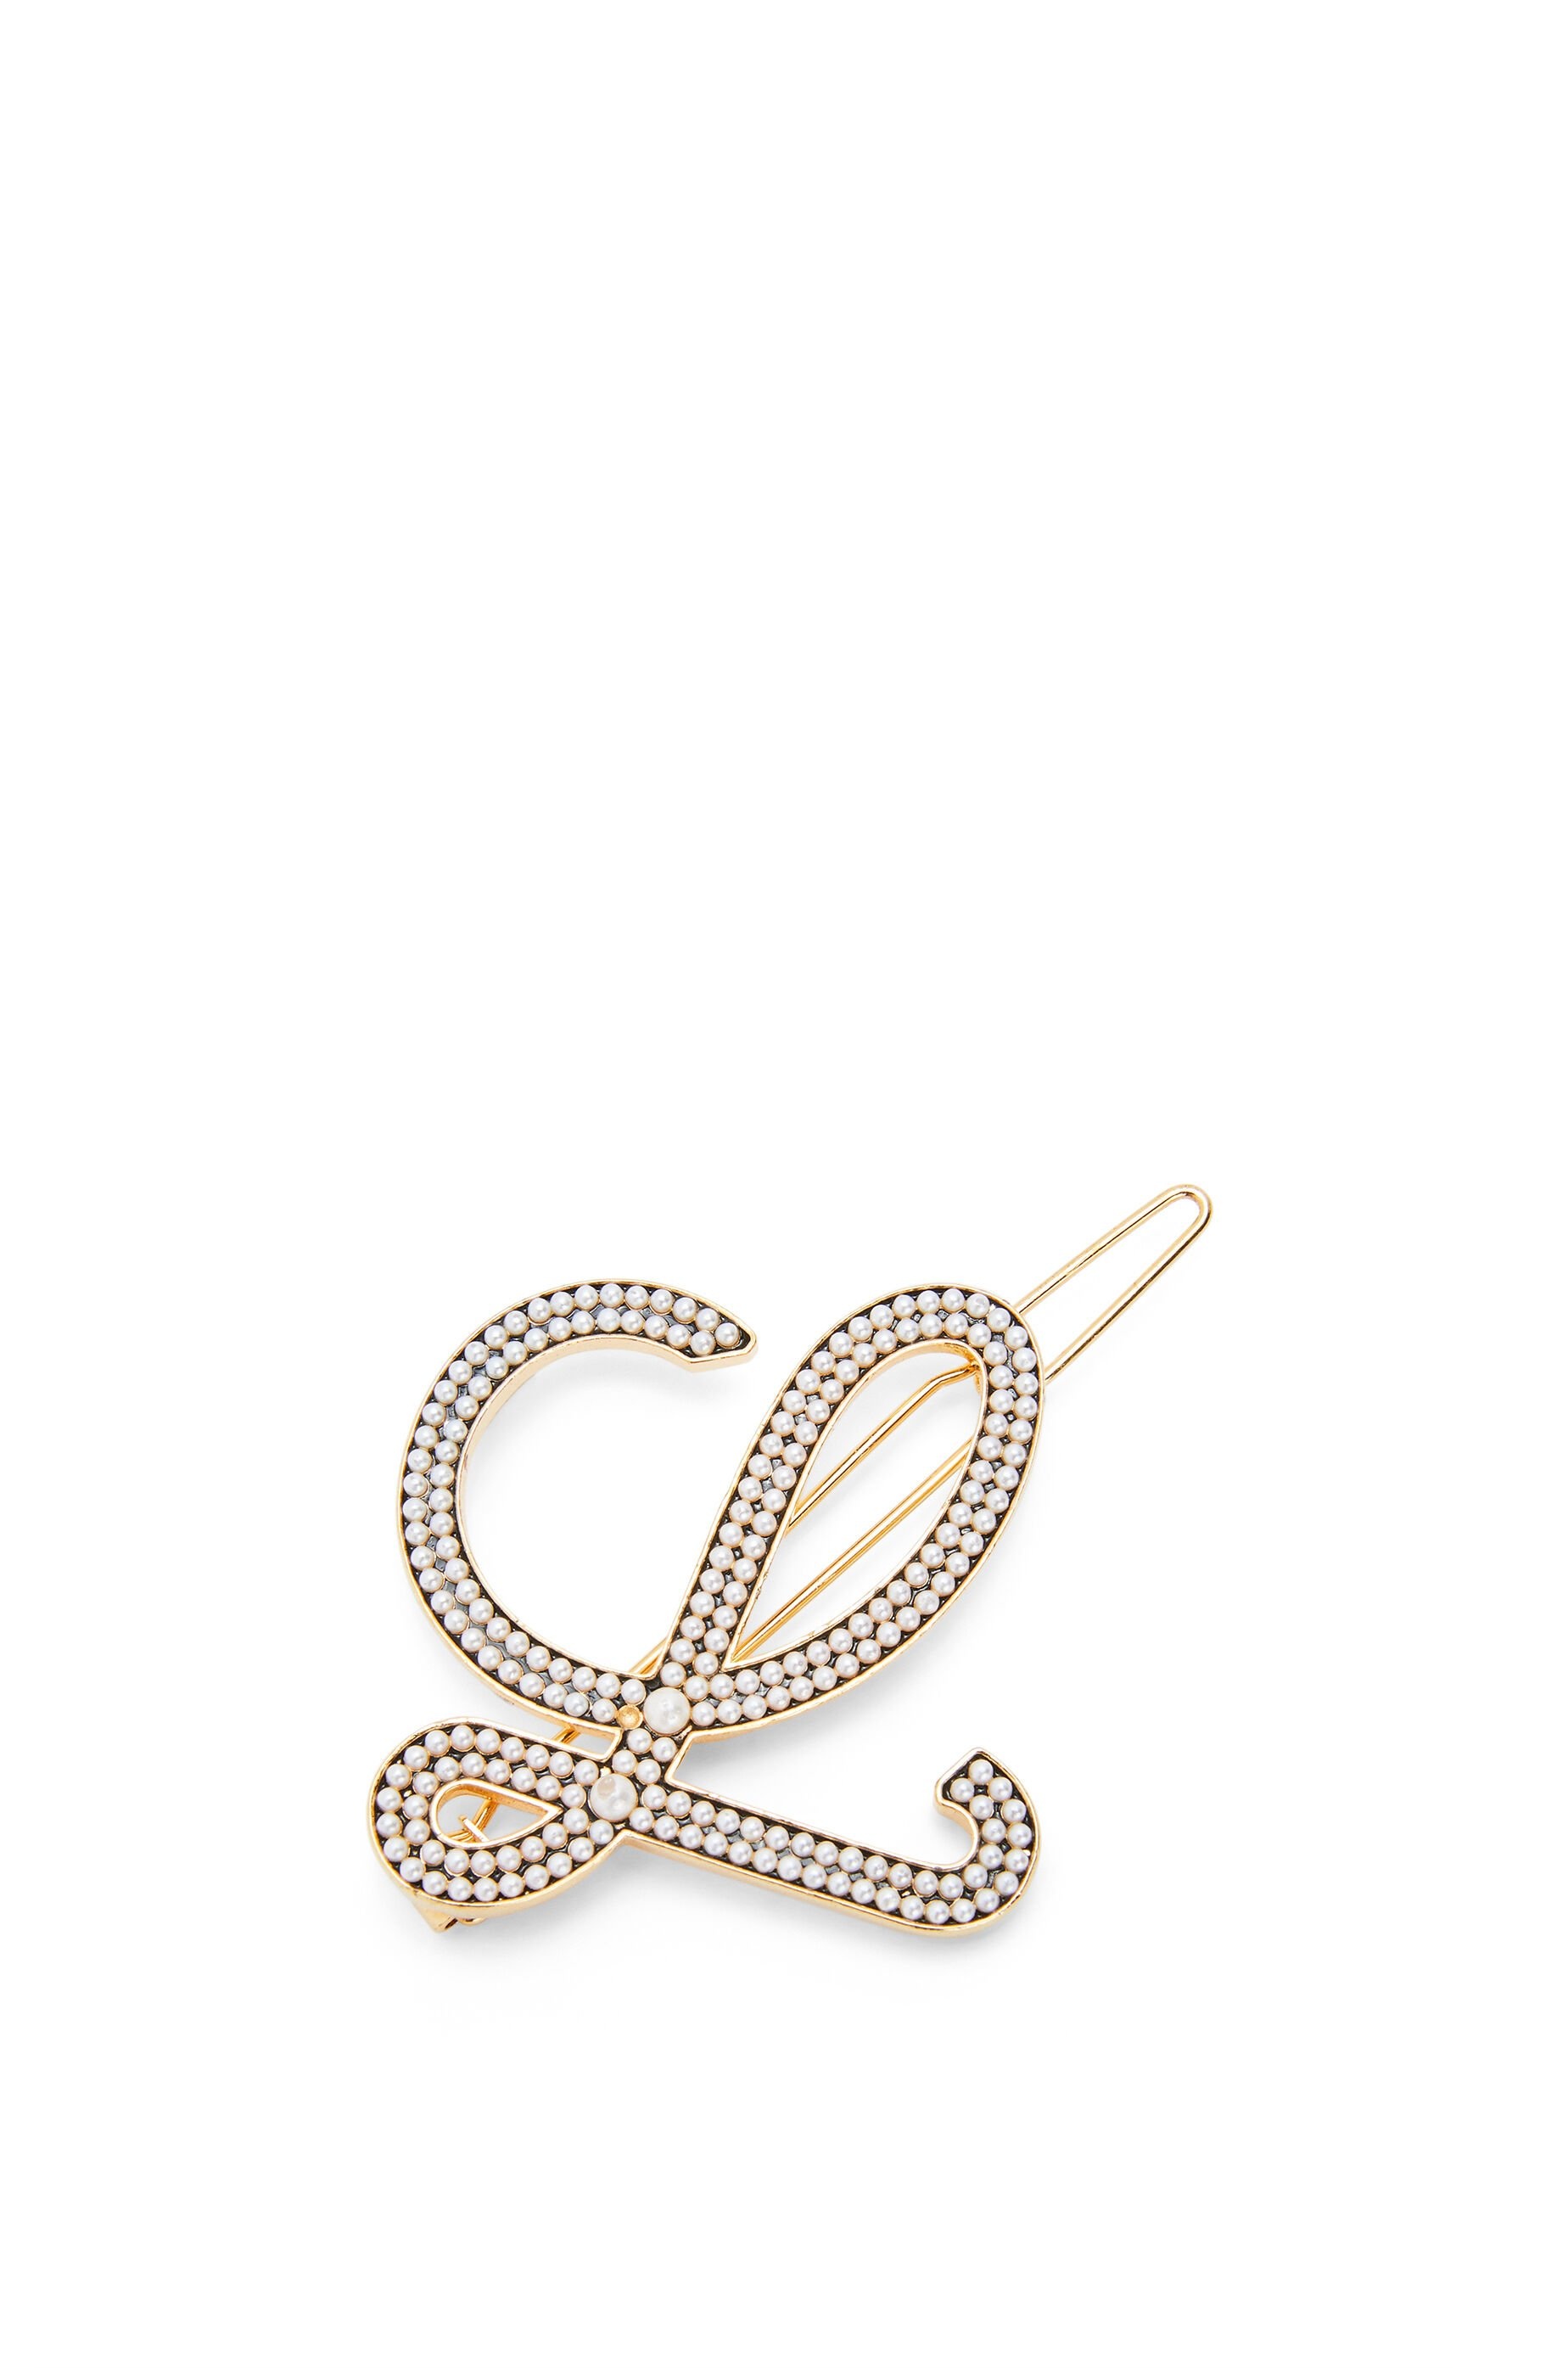 Hairpin in metal and pearls - 1